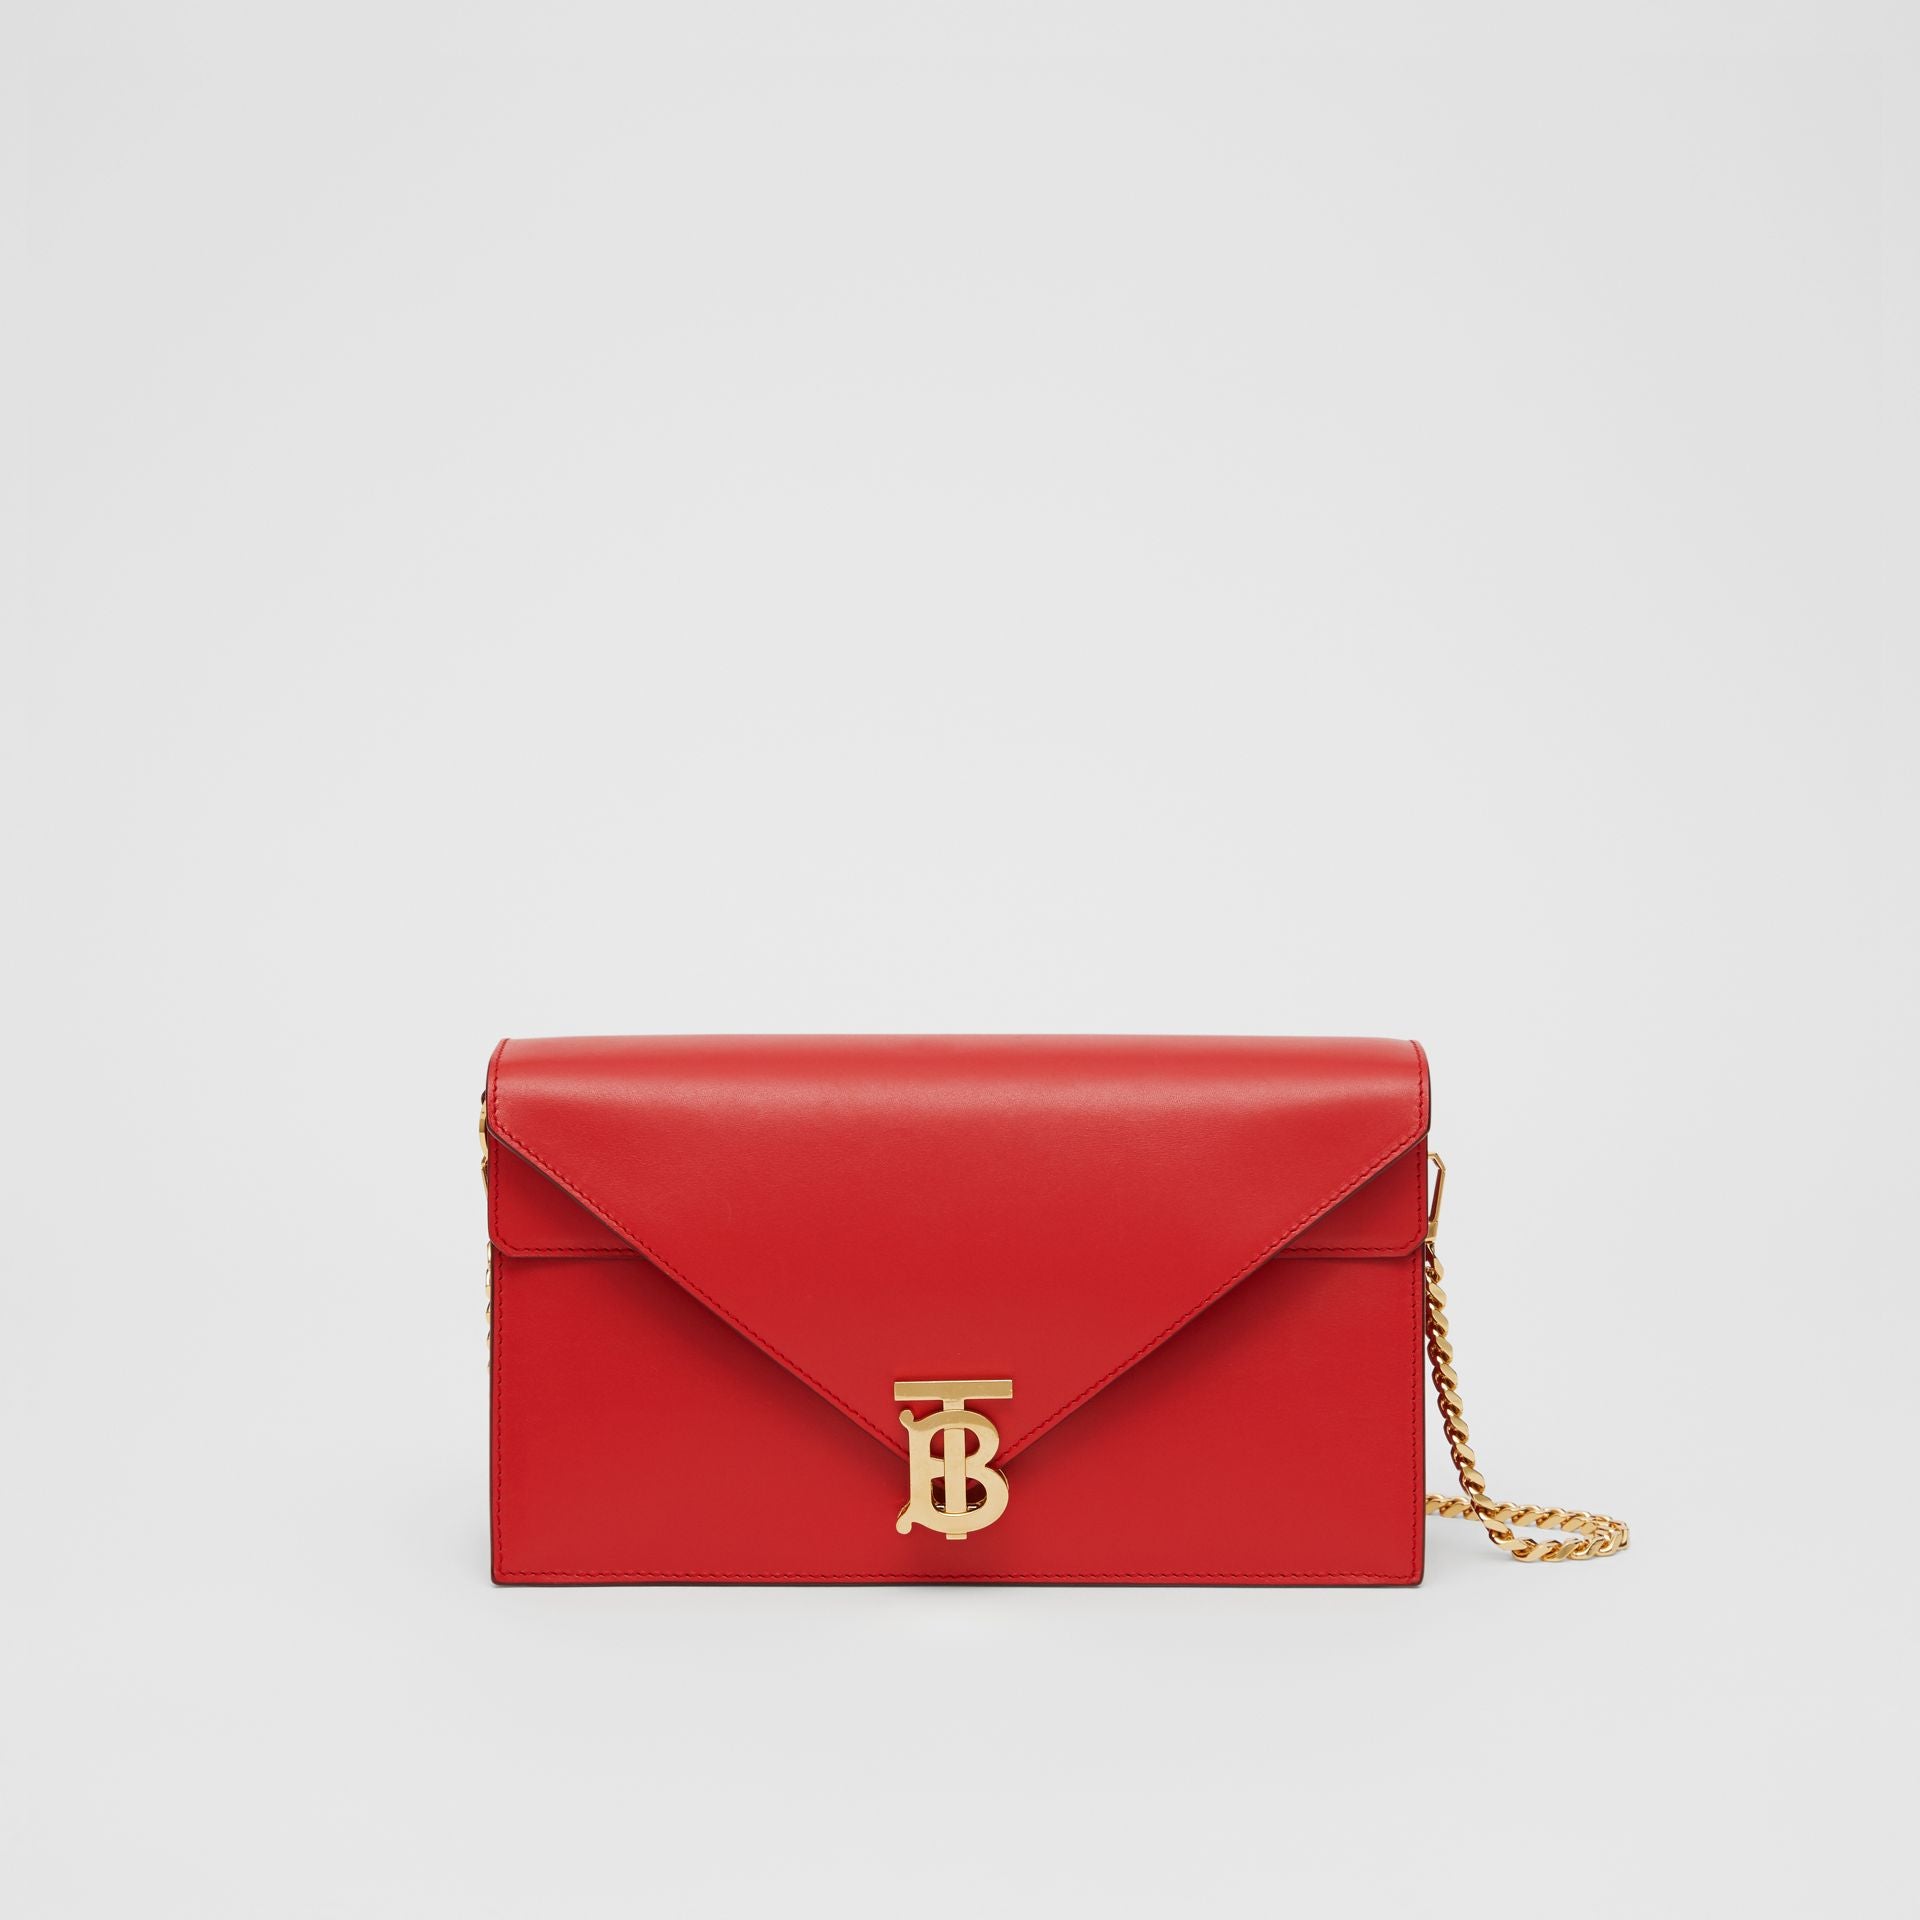 Burberry + Small Leather TB Envelope Clutch